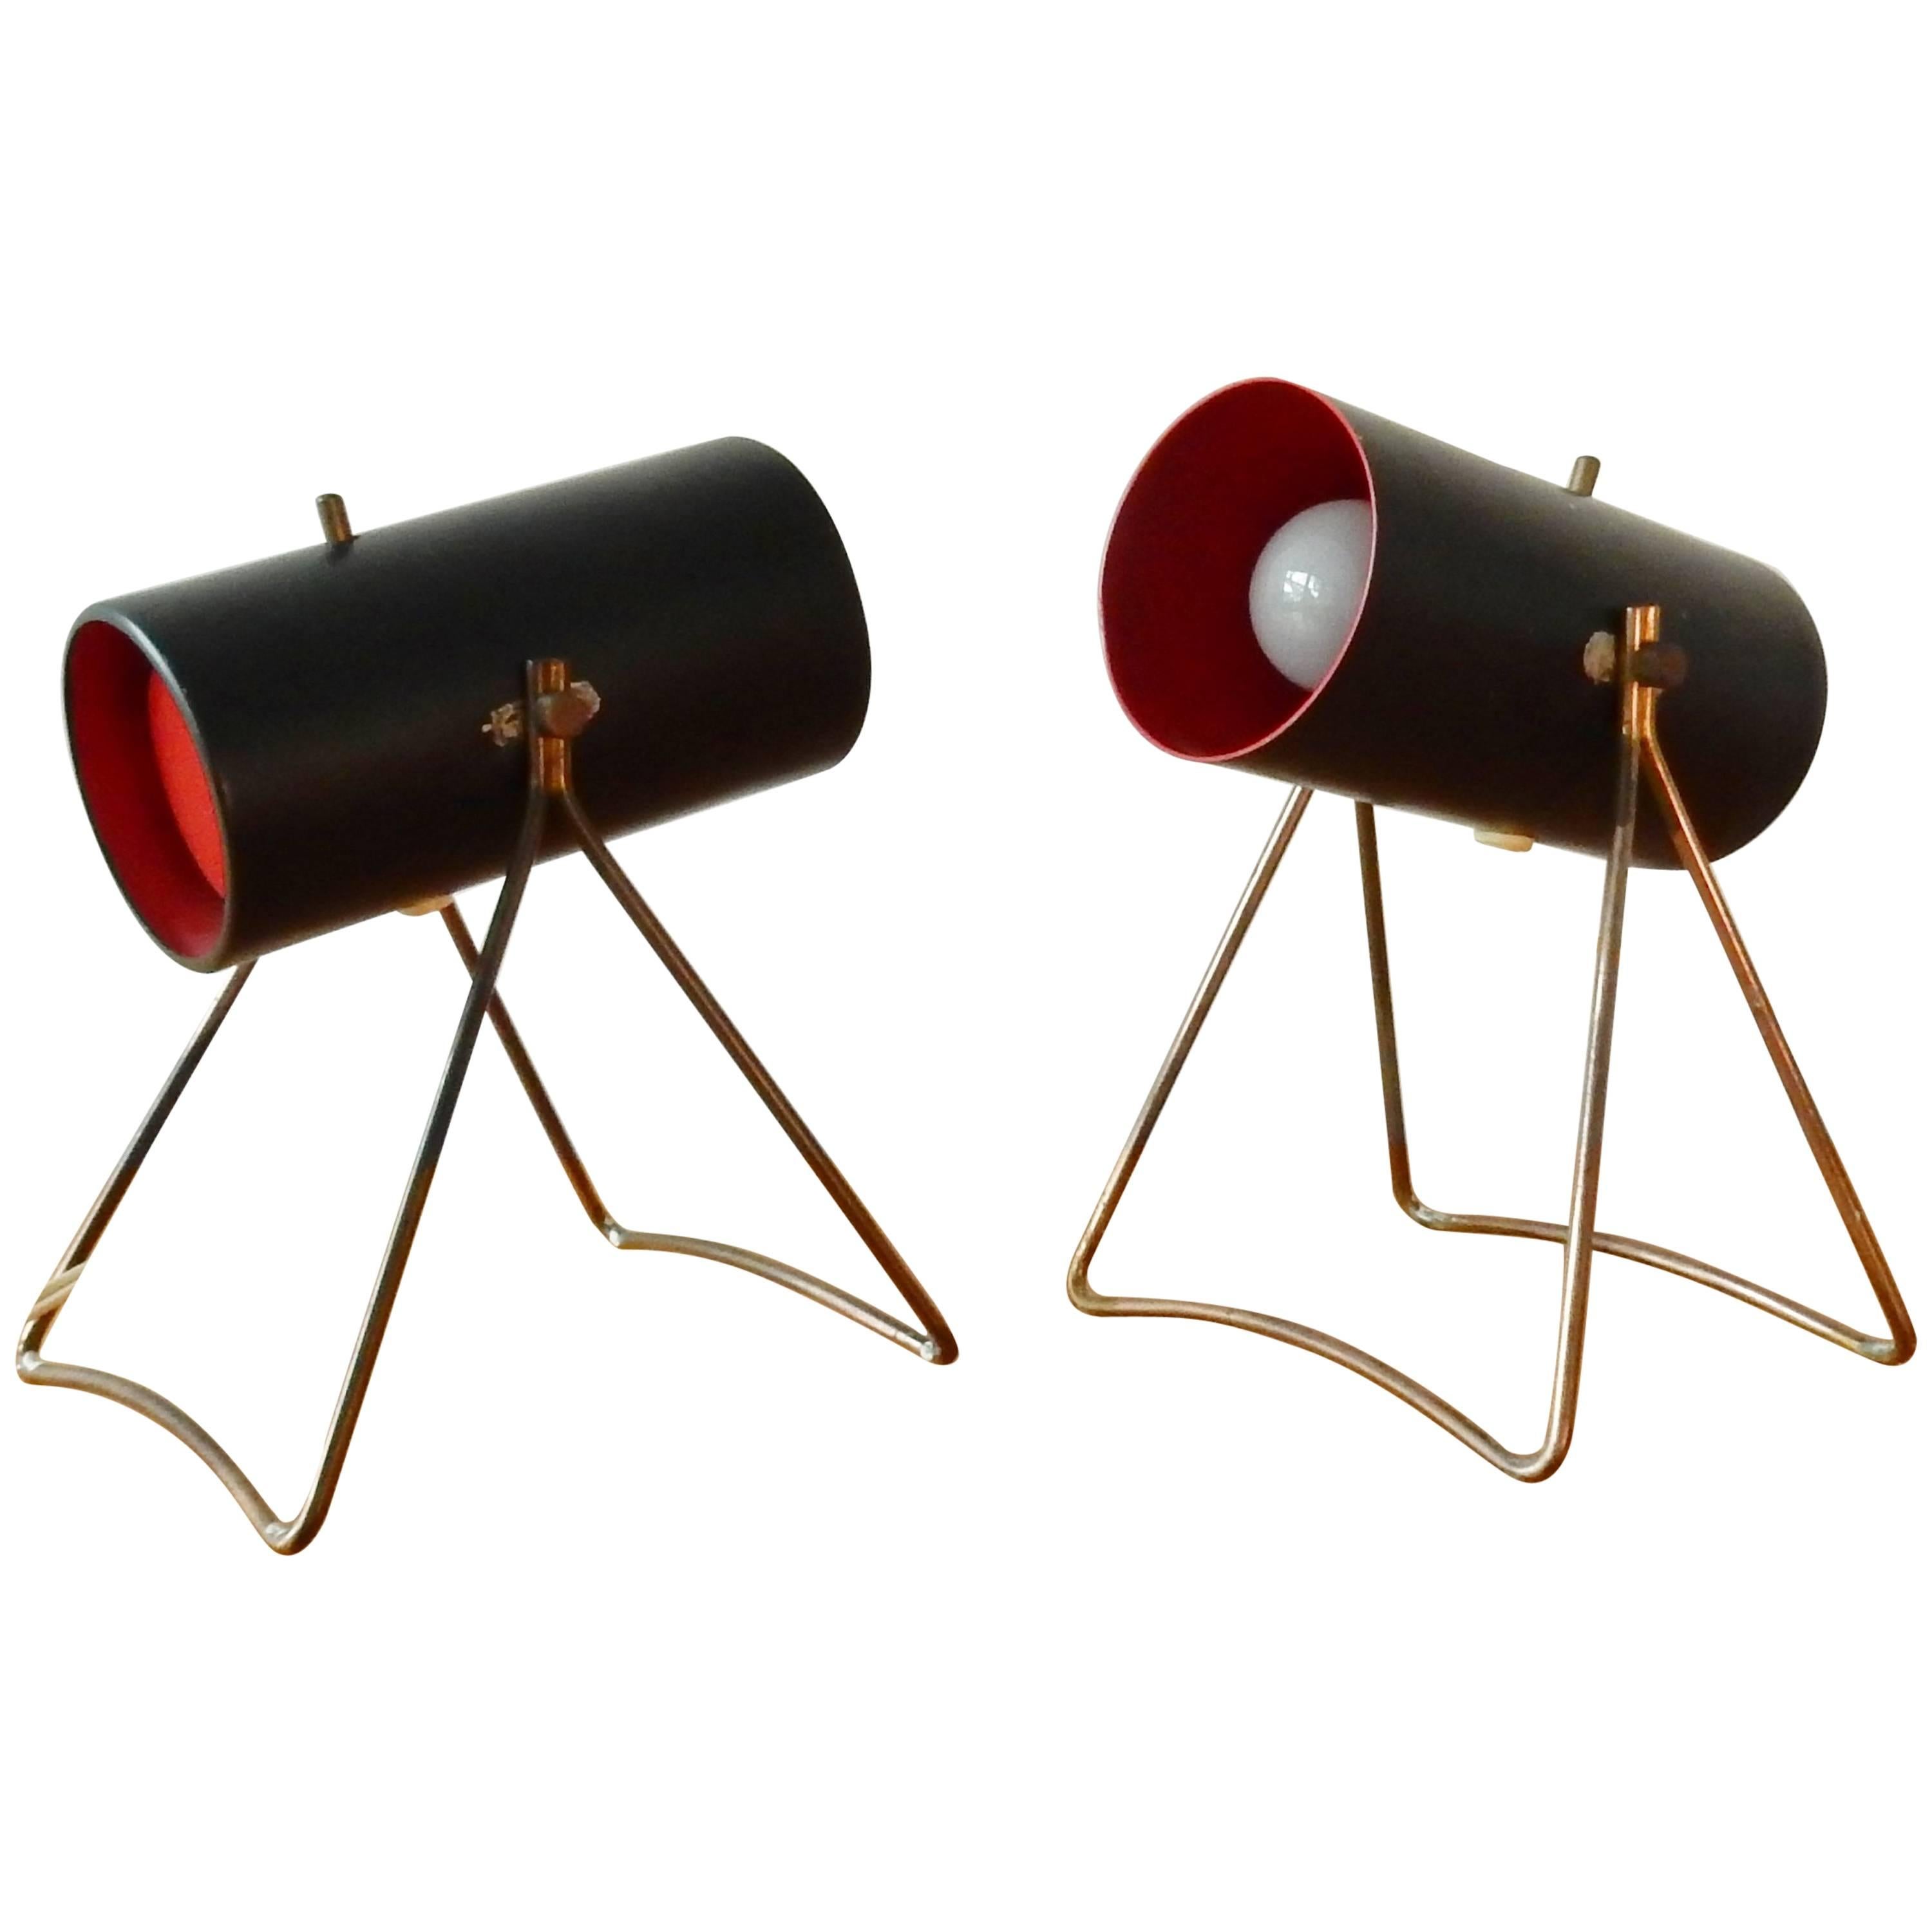 Set of Two Rare Table Lamps by Svend Aage Holm Sørensen for ASEA, Sweden, 1950s For Sale